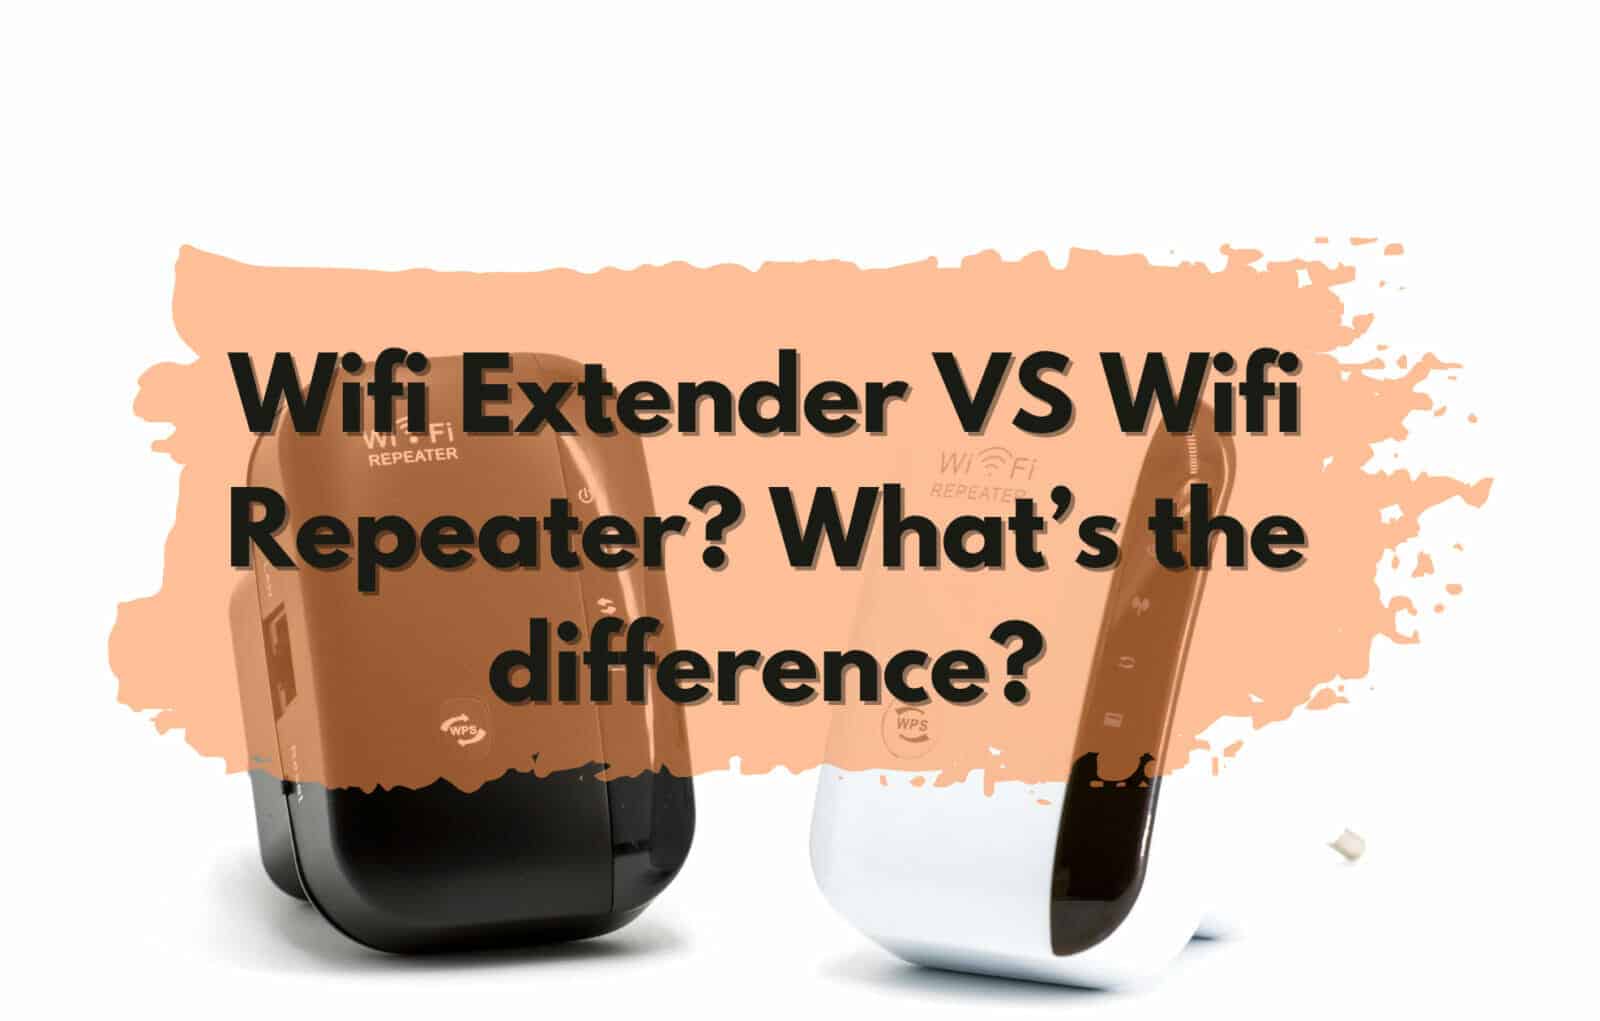 WiFi Extender VS WiFi Repeater: differing features explained.